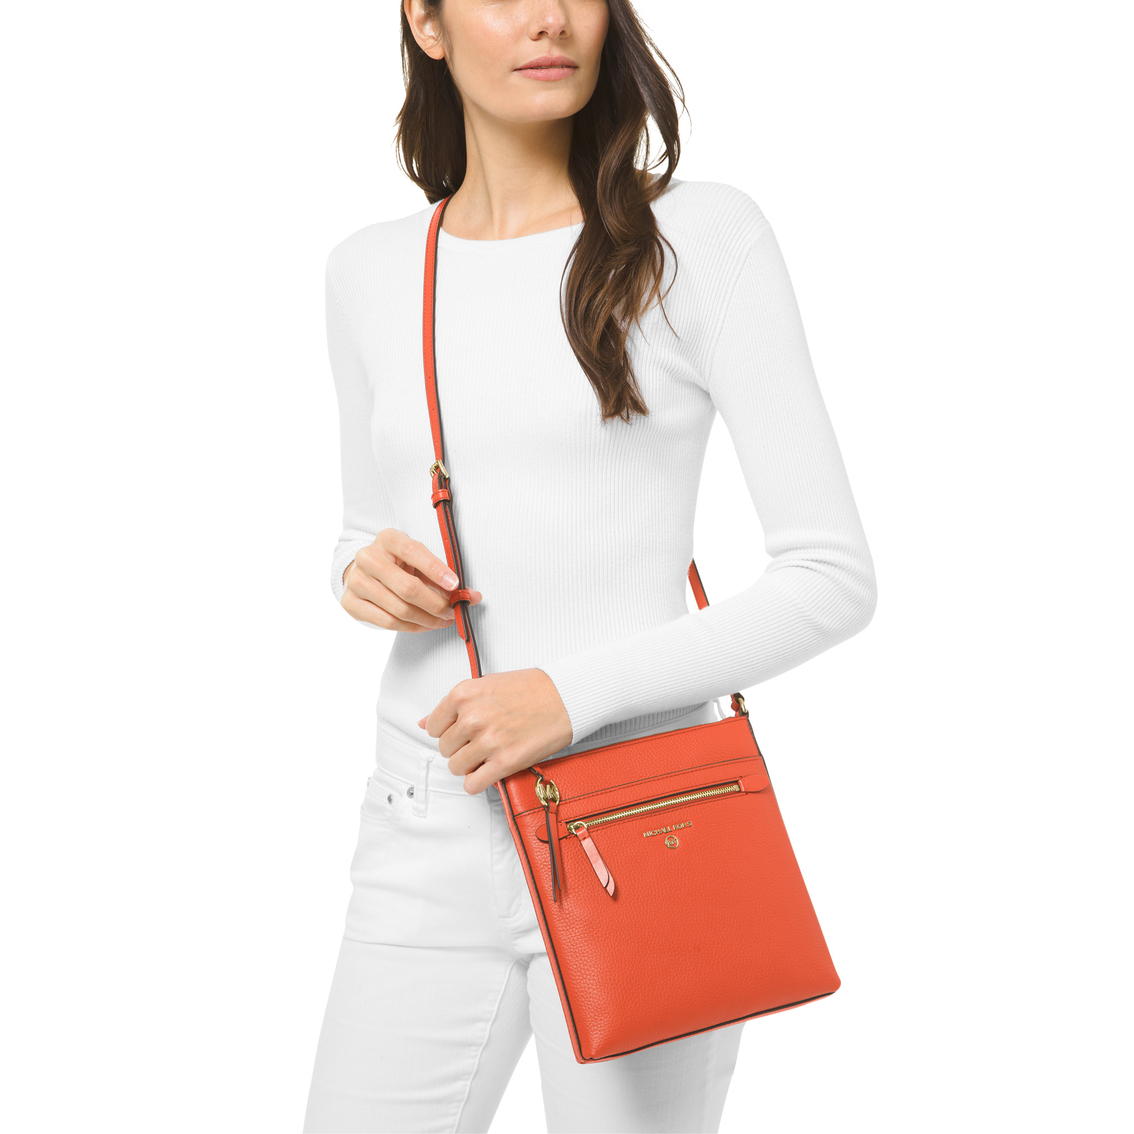 Michael Kors Jet Set Charm Small North South Flat Crossbody | Crossbody Bags  | Mother's Day Shop | Shop The Exchange